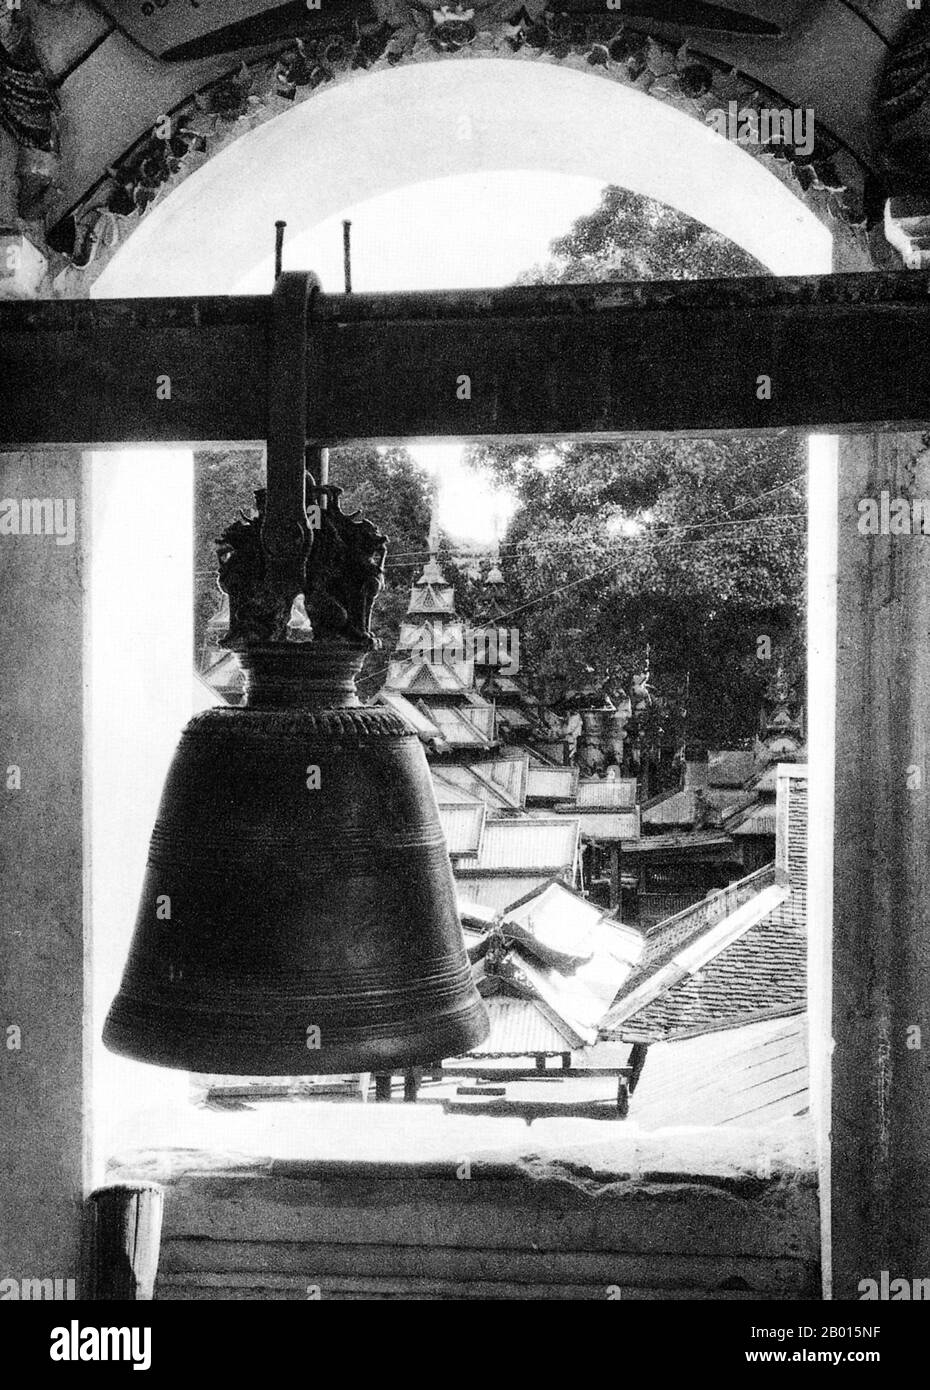 Burma/Myanmar: A pagoda bell in a Buddhist monastery in Monywa, Upper Burma, c. 1920s.  The Burmese city of Monywa is in Sagaing Division, located 136 km northwest of Mandalay on the eastern bank of the River Chindwin.  Legend attributes the first Buddhist doctrine in Burma to 228 BCE when Sohn Uttar Sthavira, one of the royal monks to Emperor Ashoka the Great of India, came to the country with other monks and sacred texts. However, the era of Buddhism truly began in the 11th century after King Anawrahta of Pagan (Bagan) was converted to Theravada Buddhism. Stock Photo